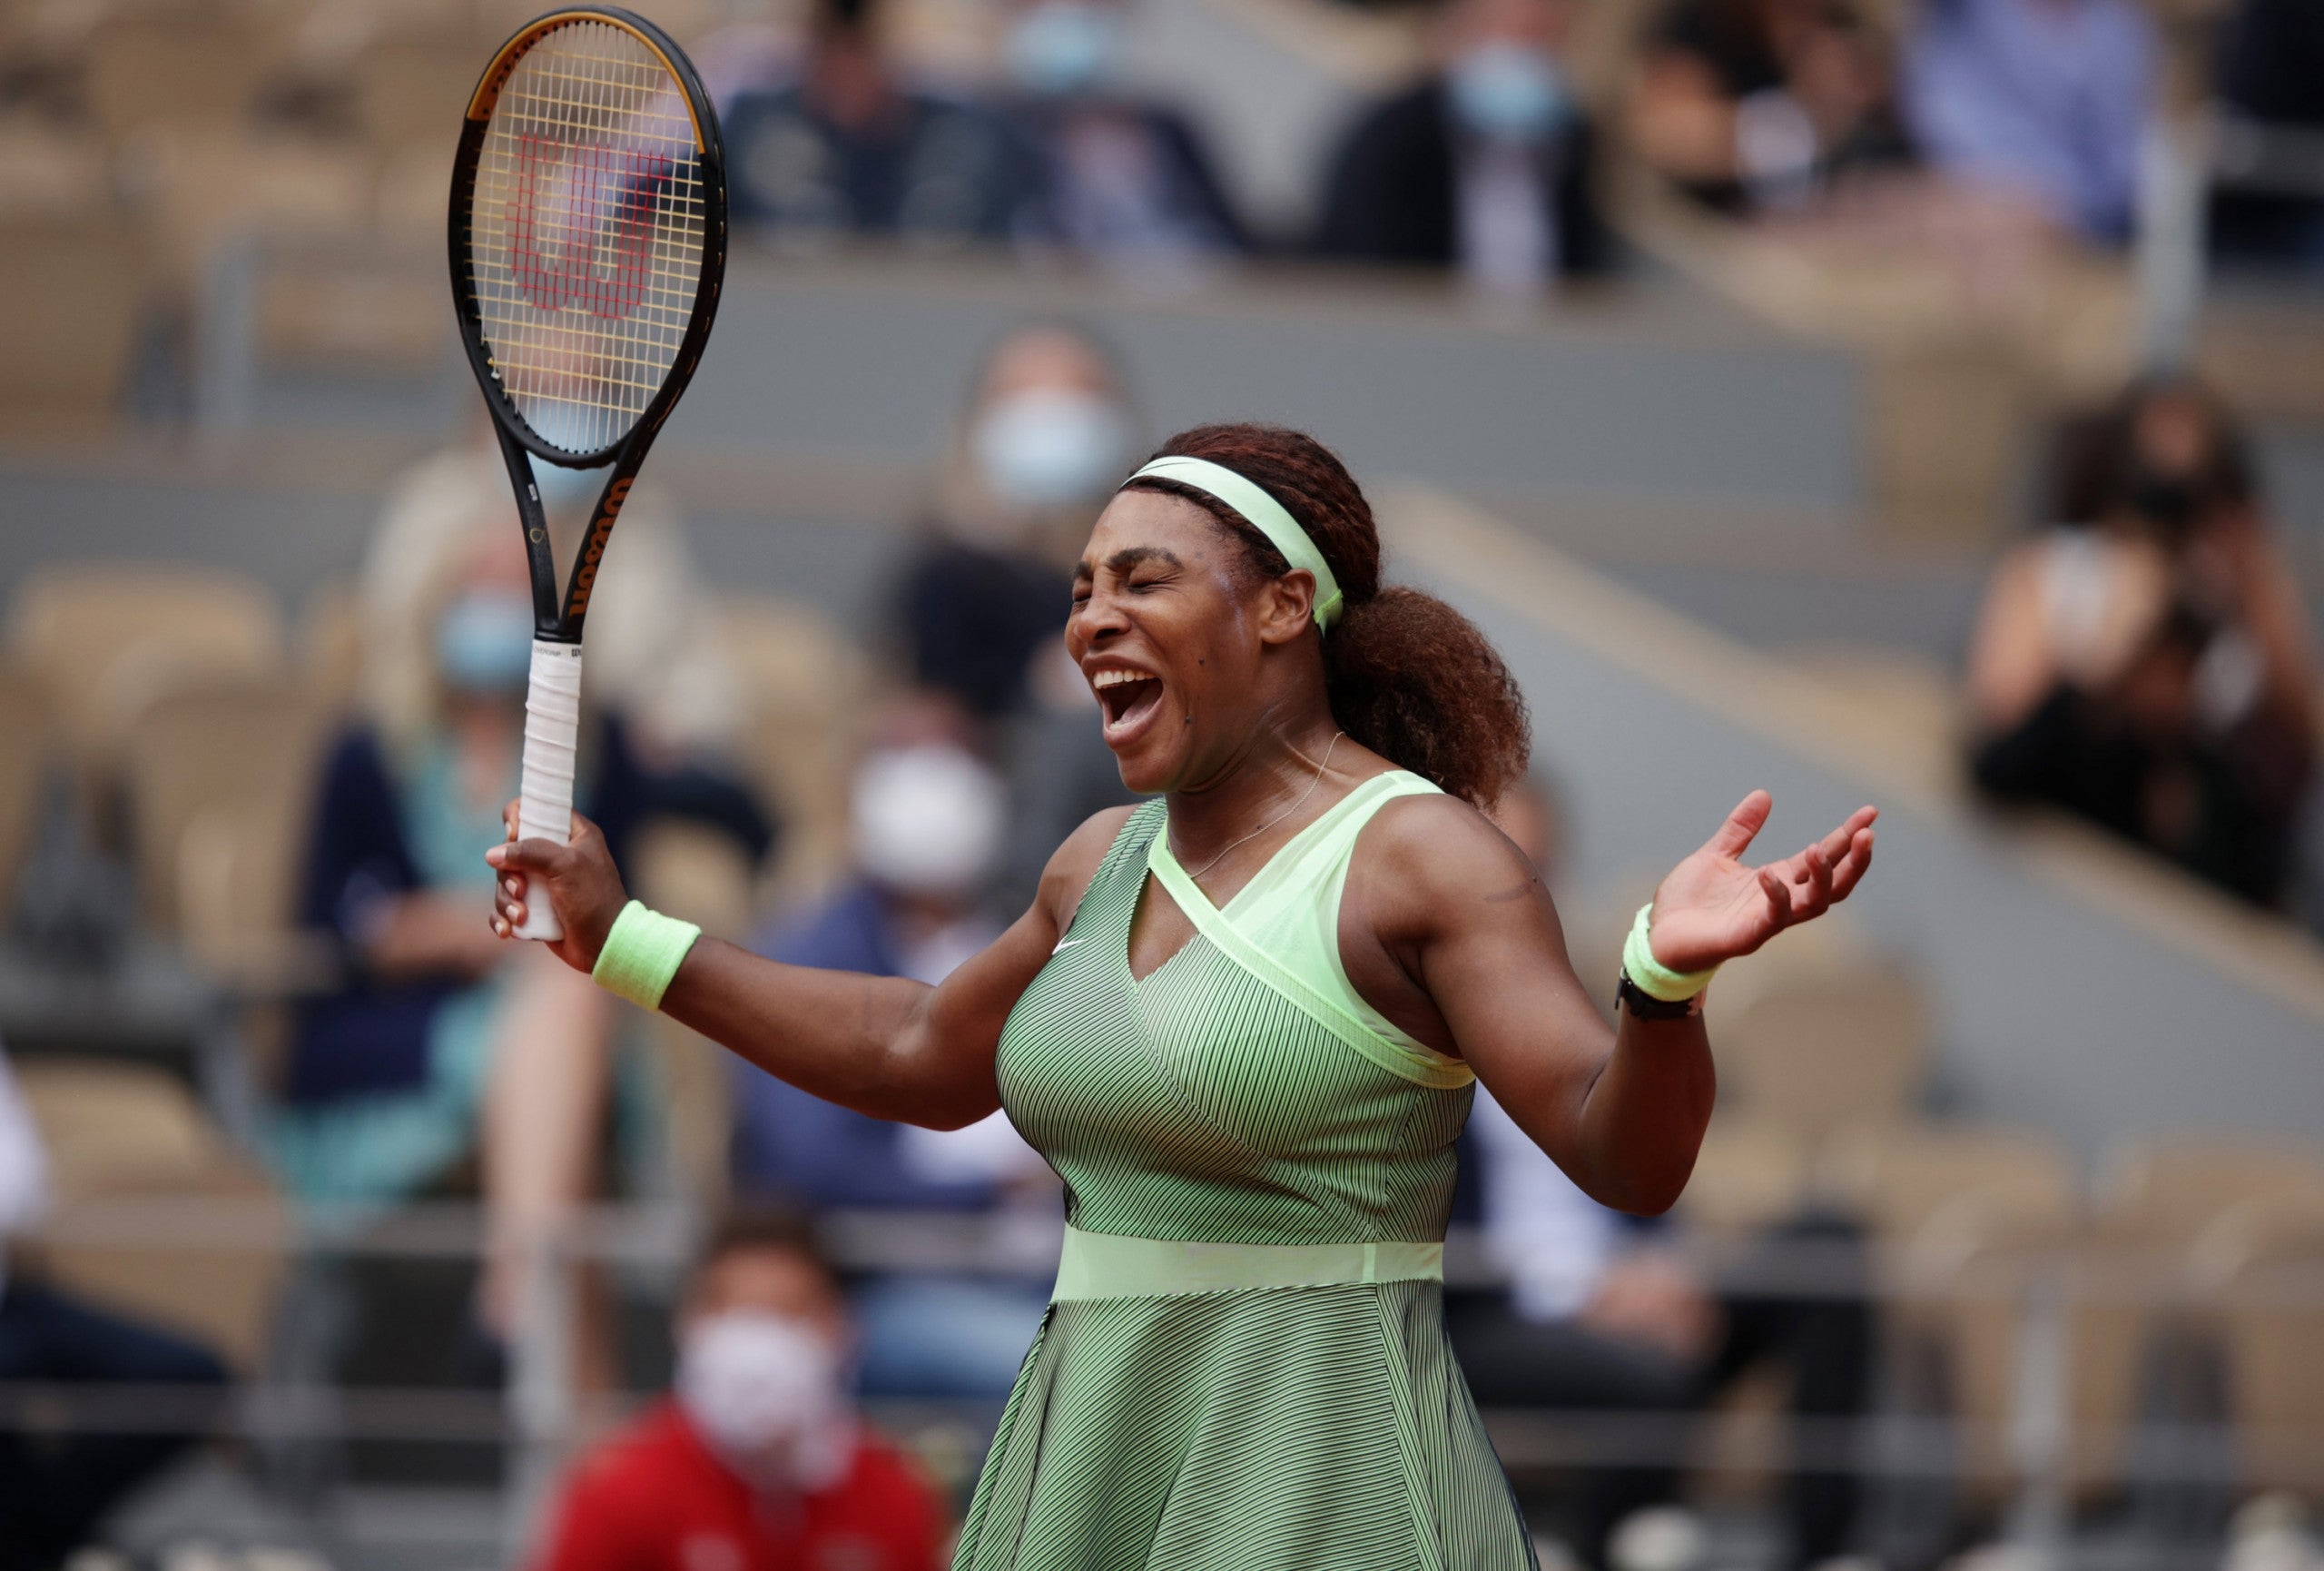 Serena Williams pulls out of US Open, citing torn hamstring